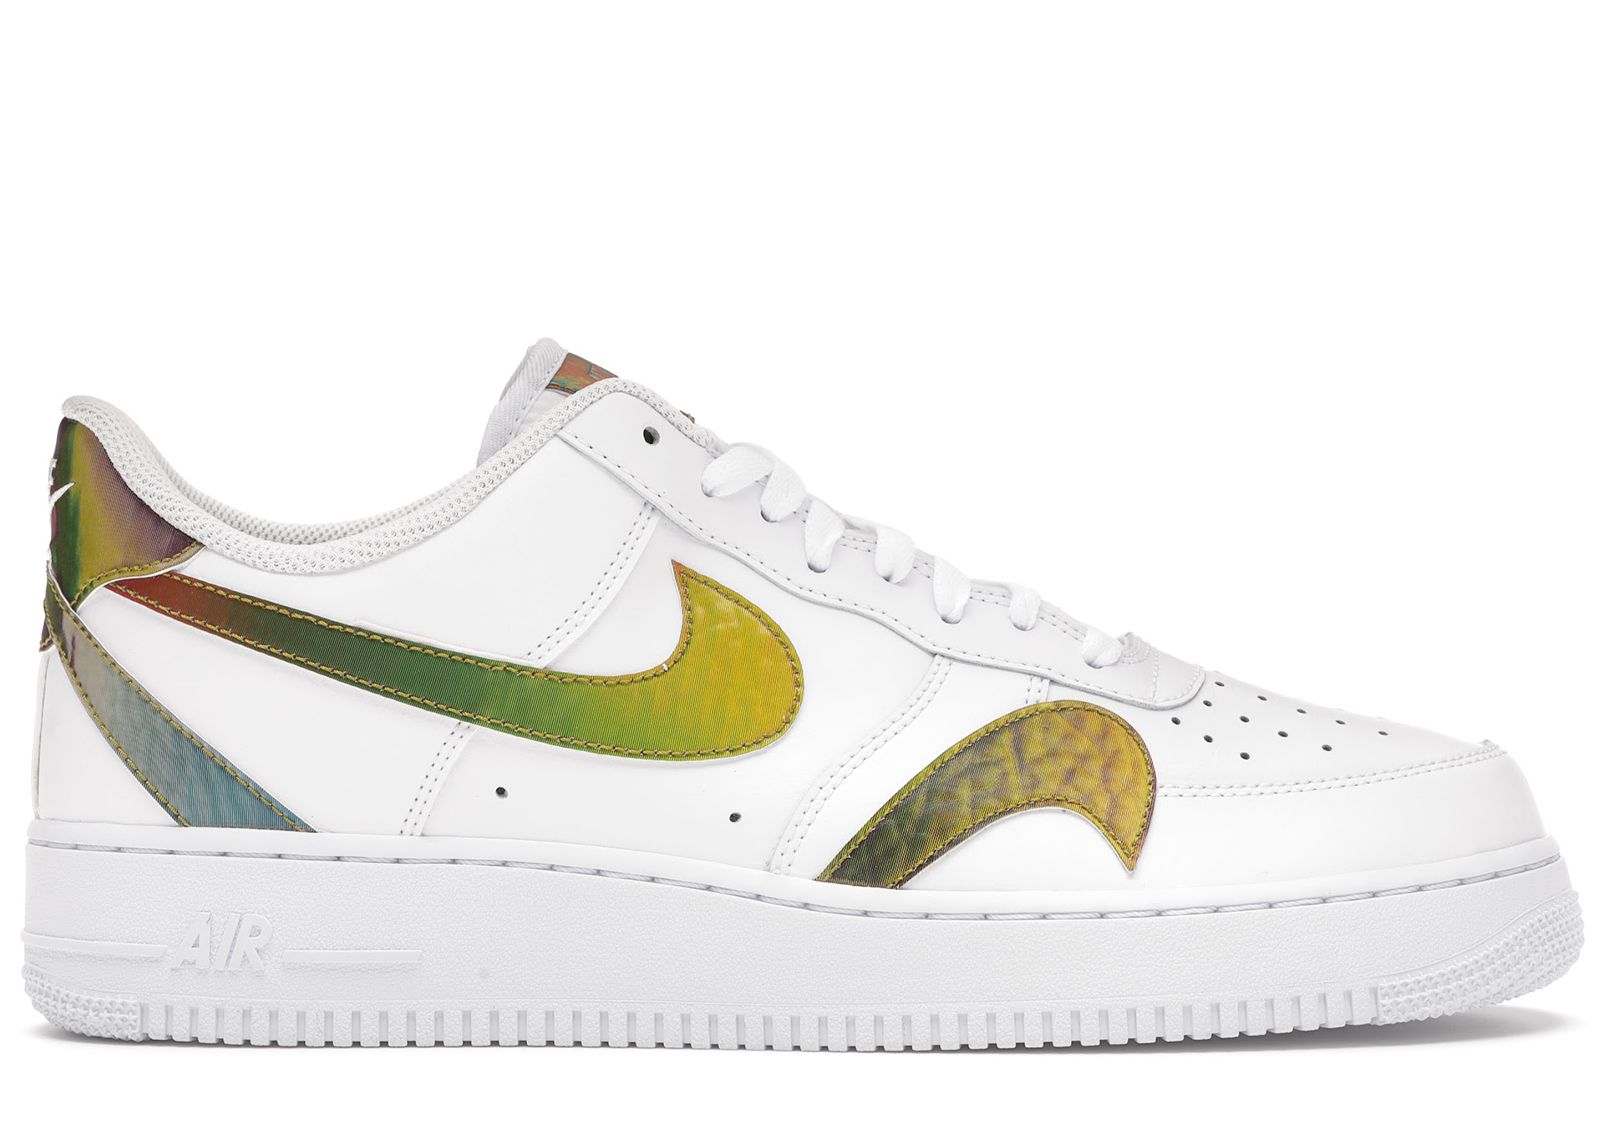 Nike Air Force 1 Low Misplaced Swooshes White Multi | StockX